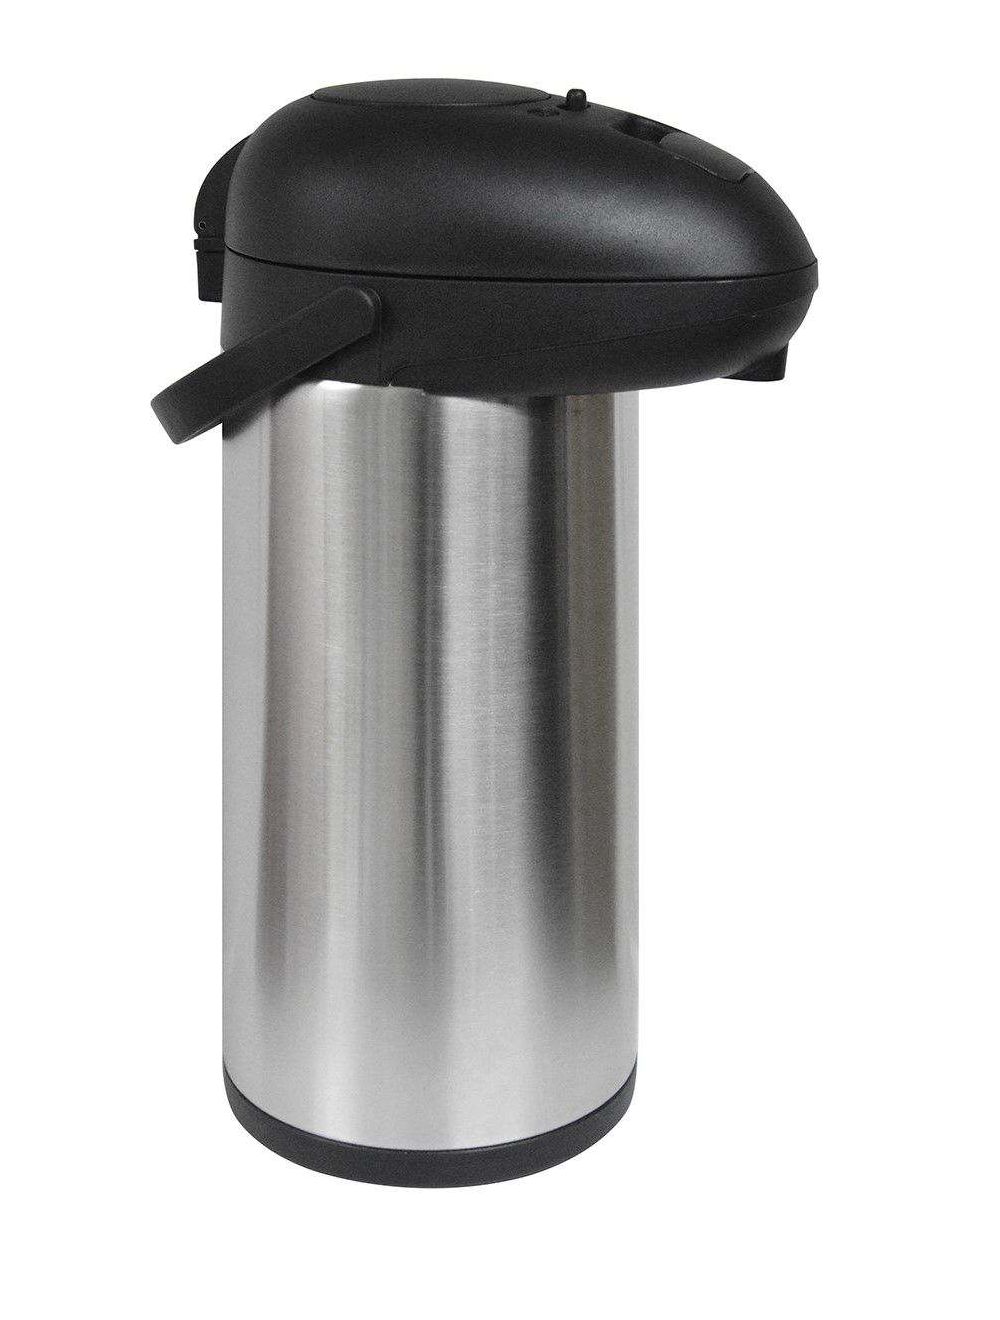 Royalford RF8338 5.0L Double Wall Stainless Steel Airpot Flask